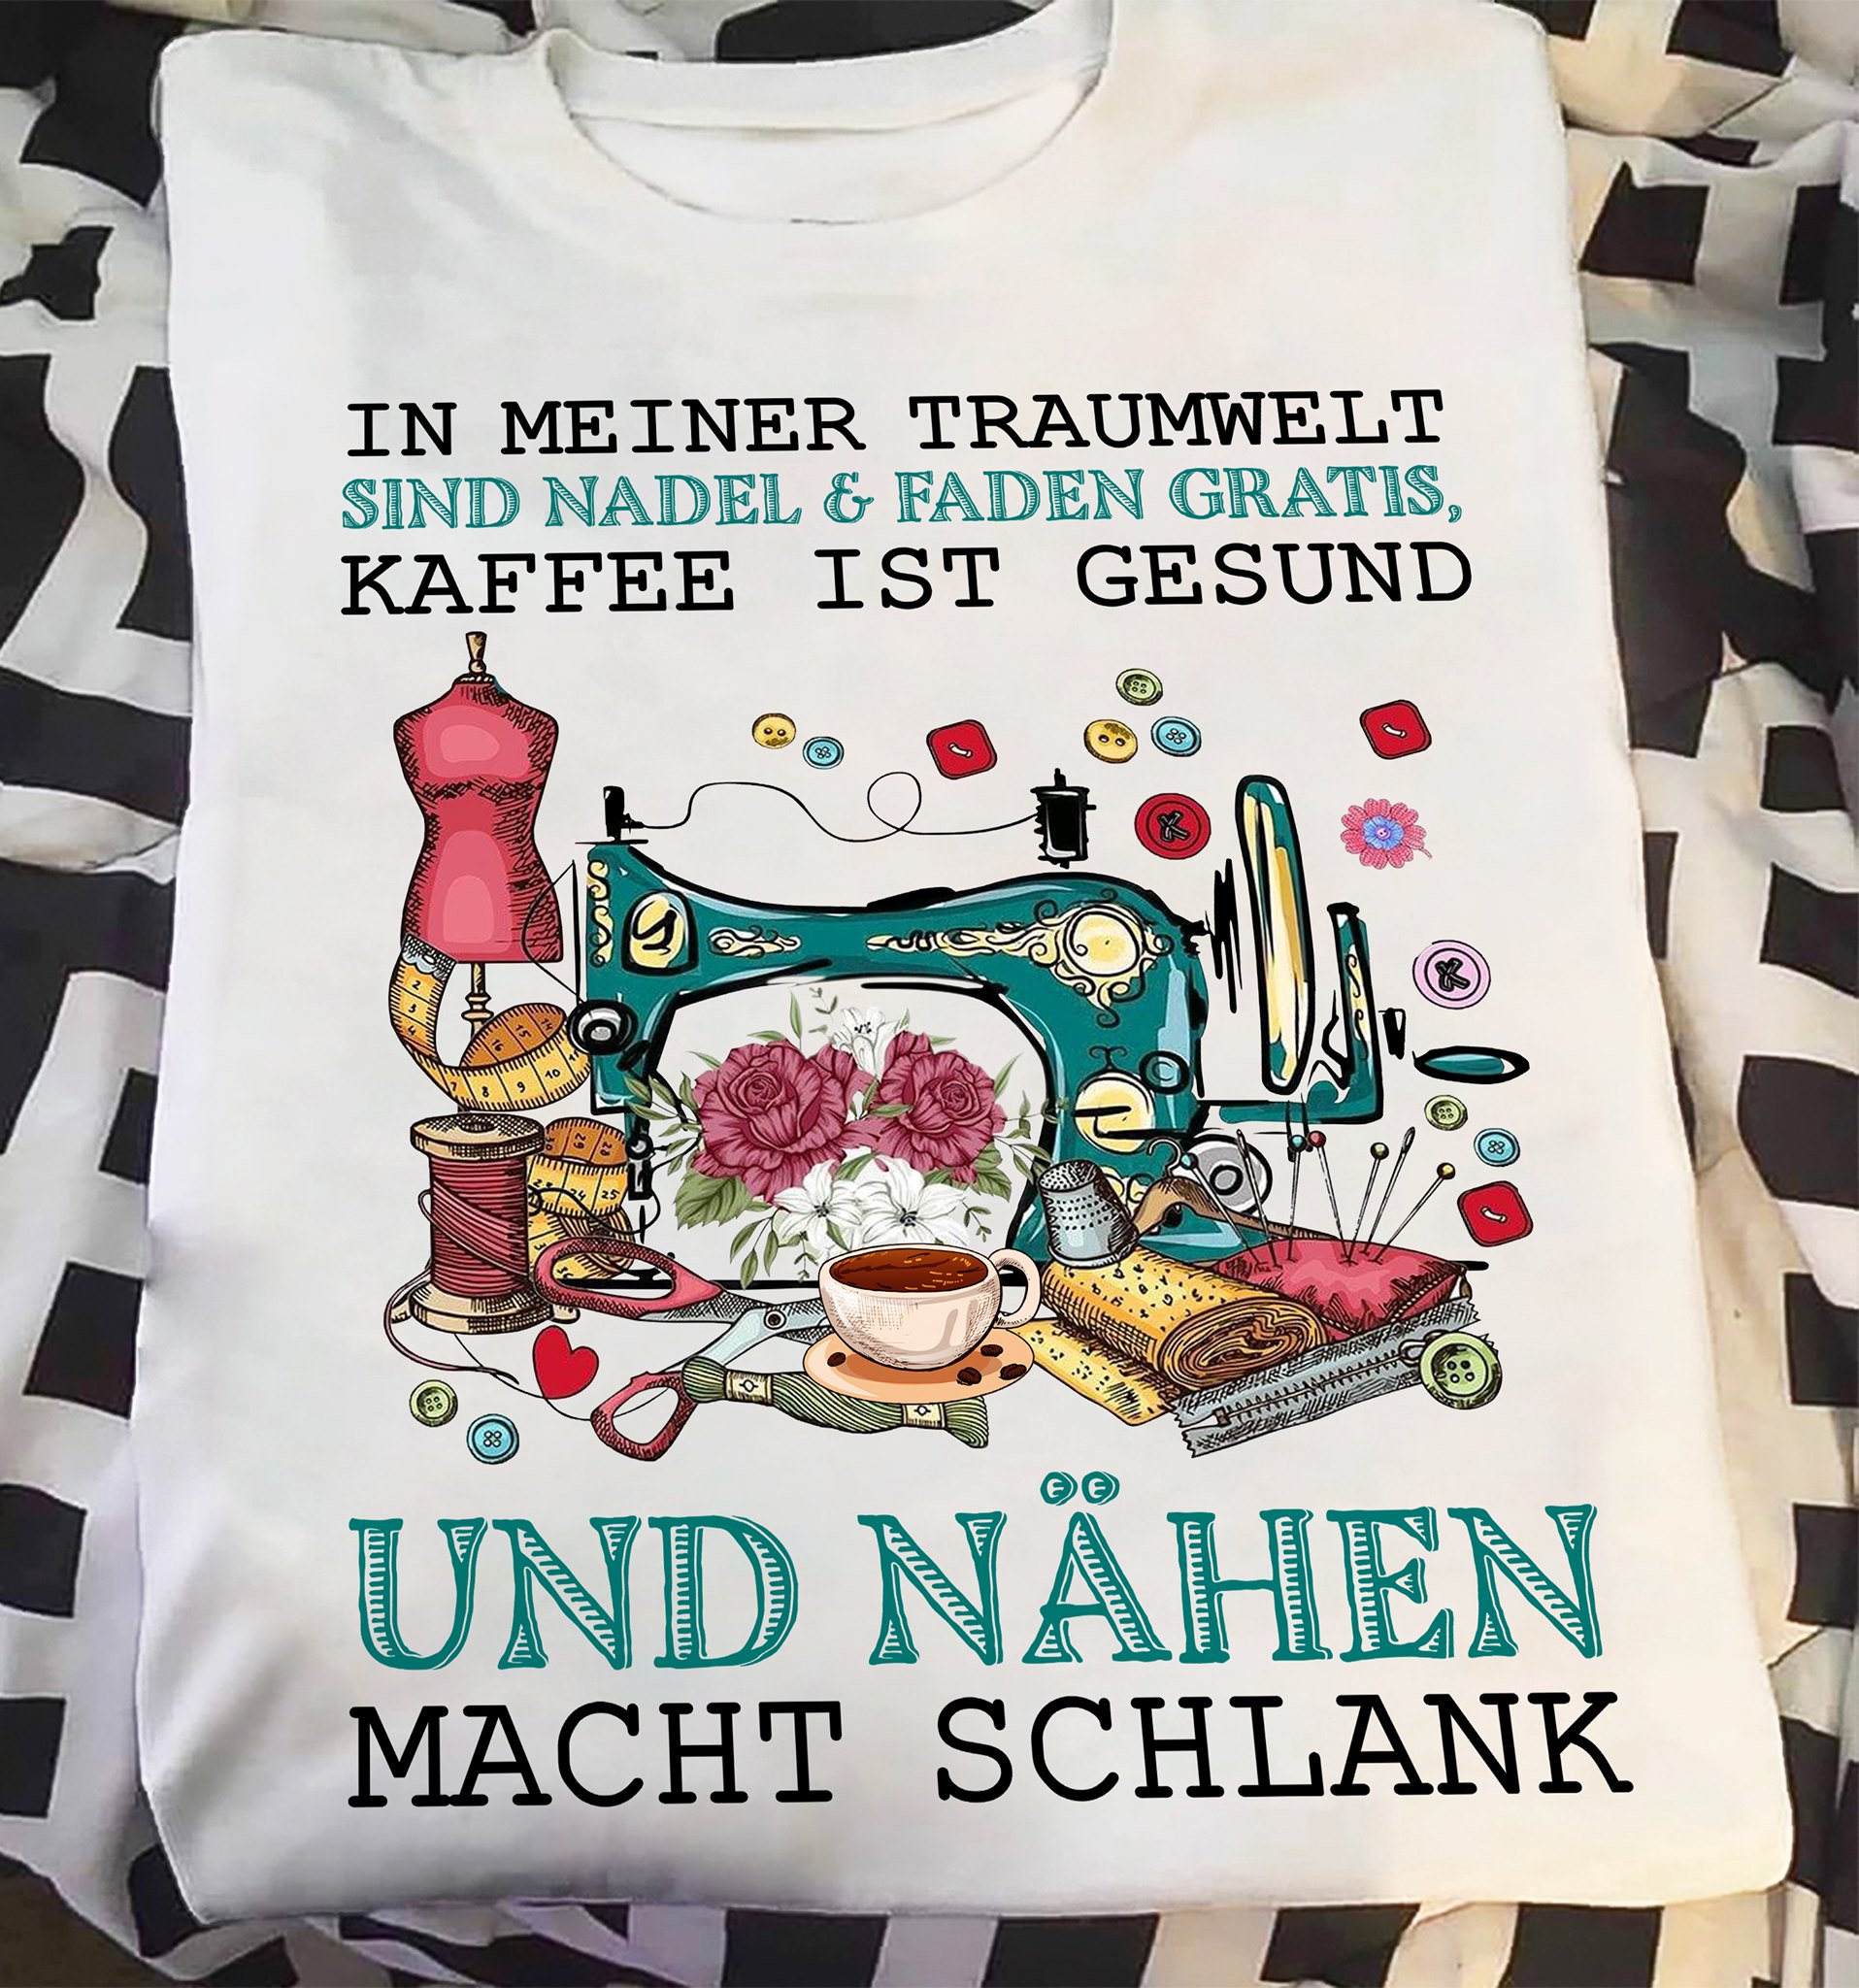 In meiner traumwelt sind nadel and faden gratis - Sewing machine and coffee